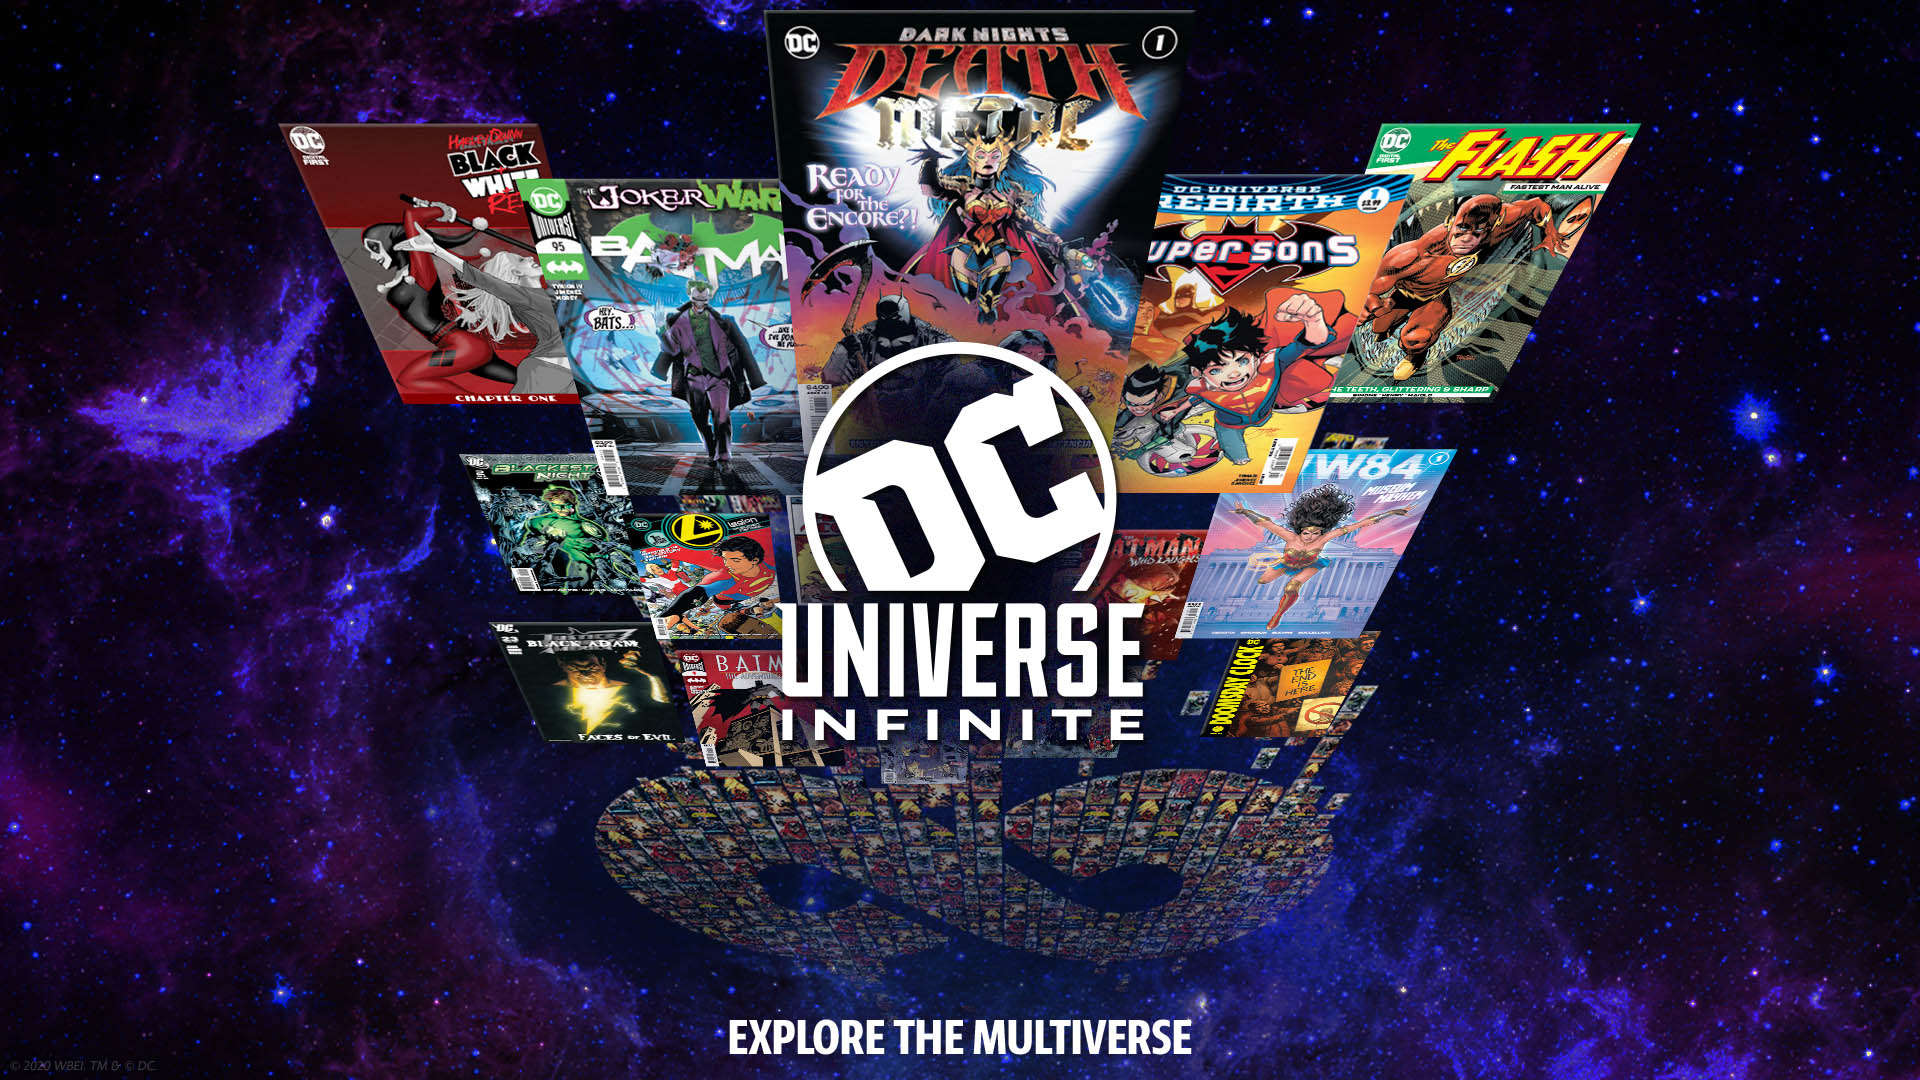 DC Announces New Universe of Ten Connected Films and Shows